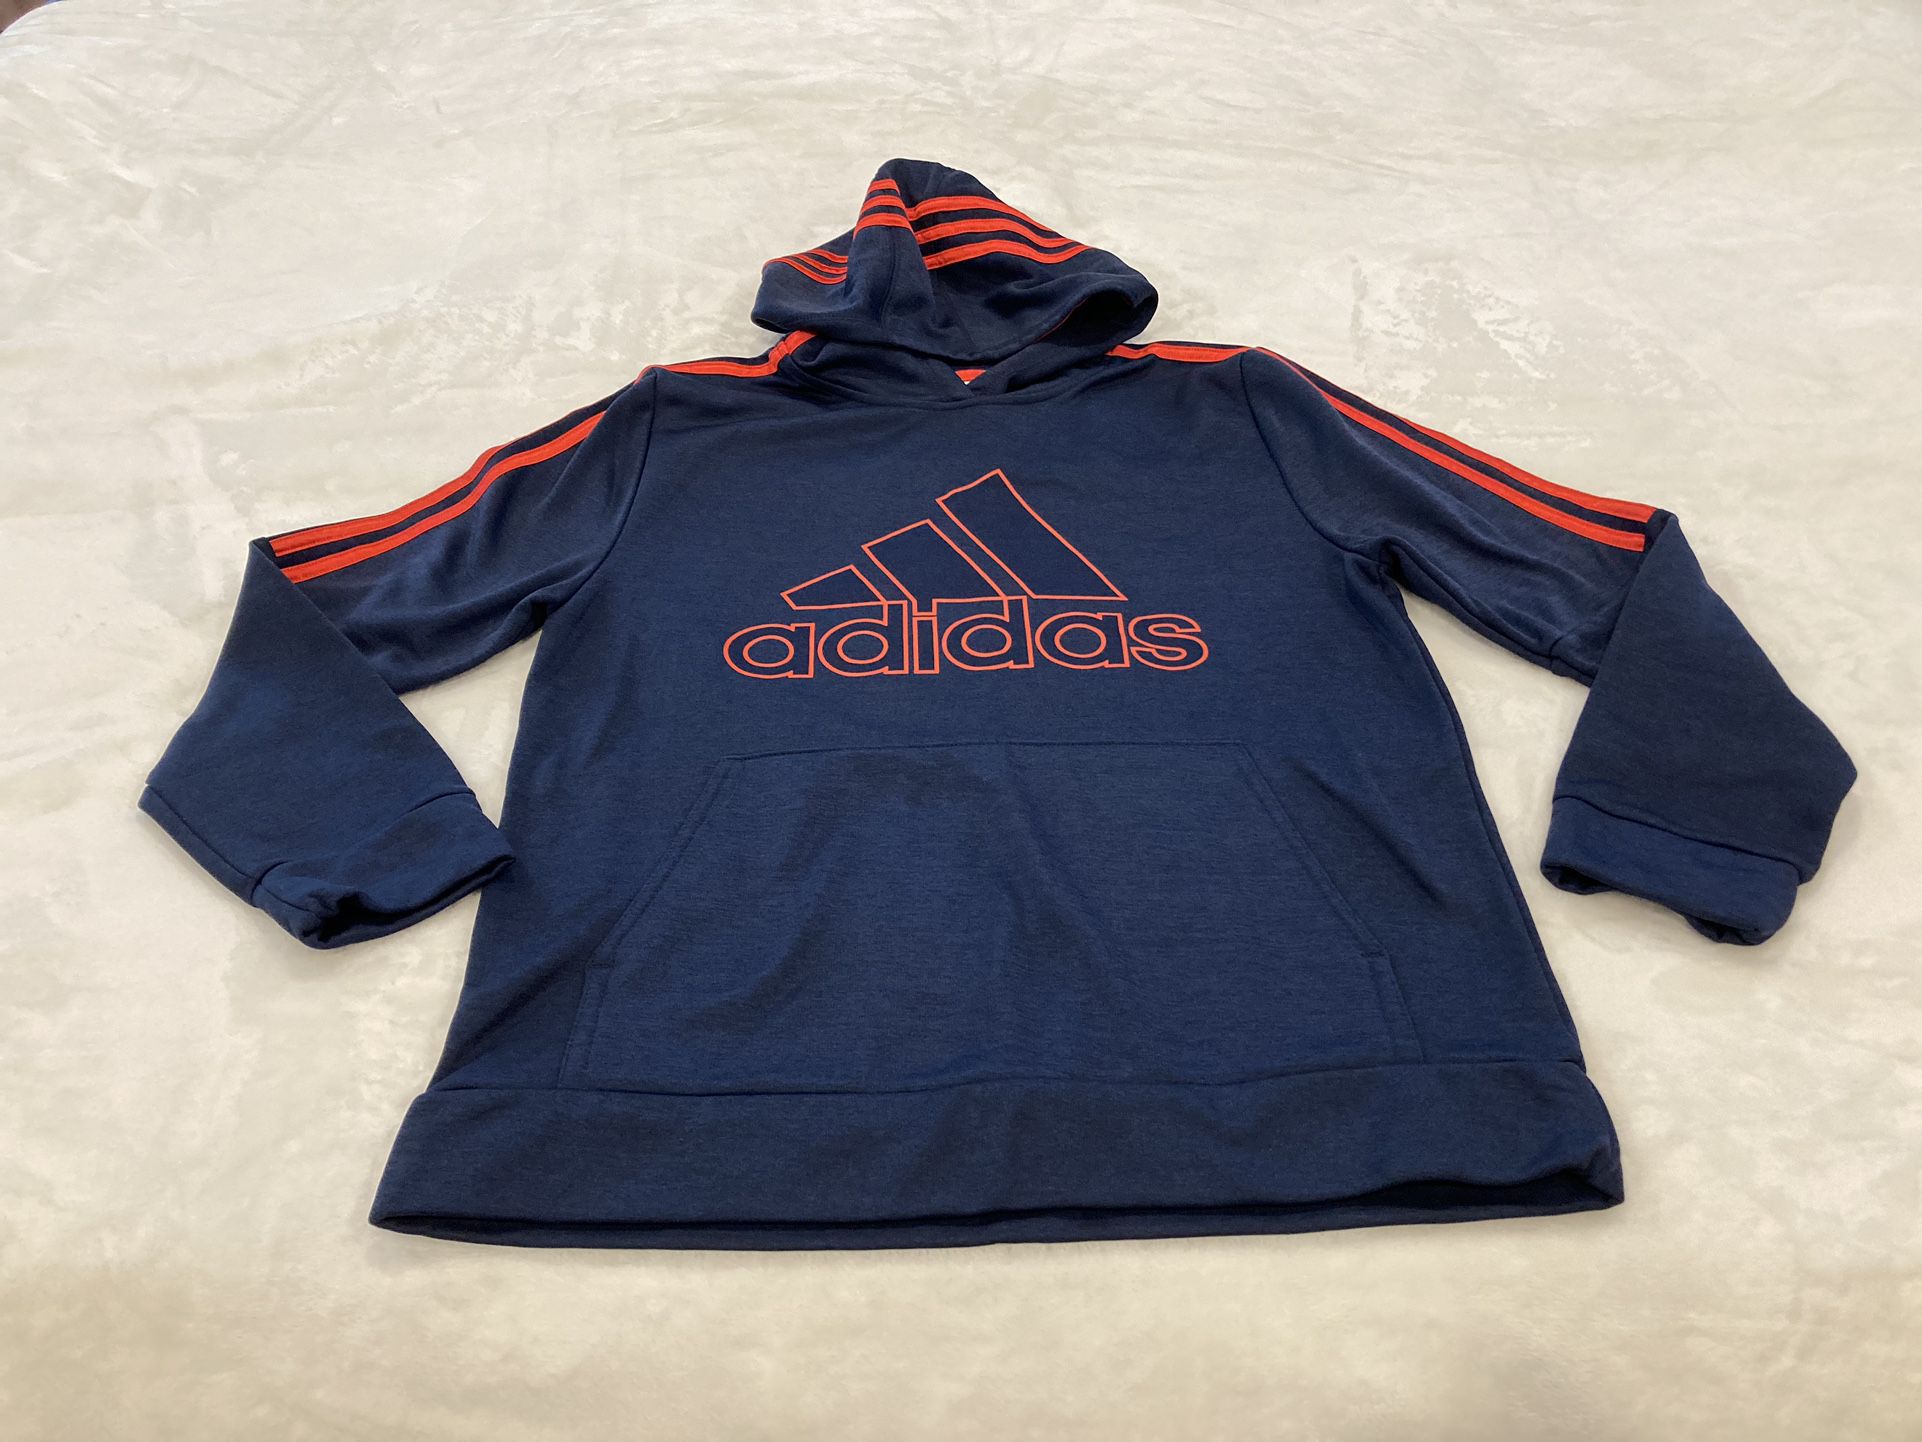 Locomotora combustible Aumentar Adidas Sweater For Boys XL 18/20 for Sale in Smithtown, NY - OfferUp